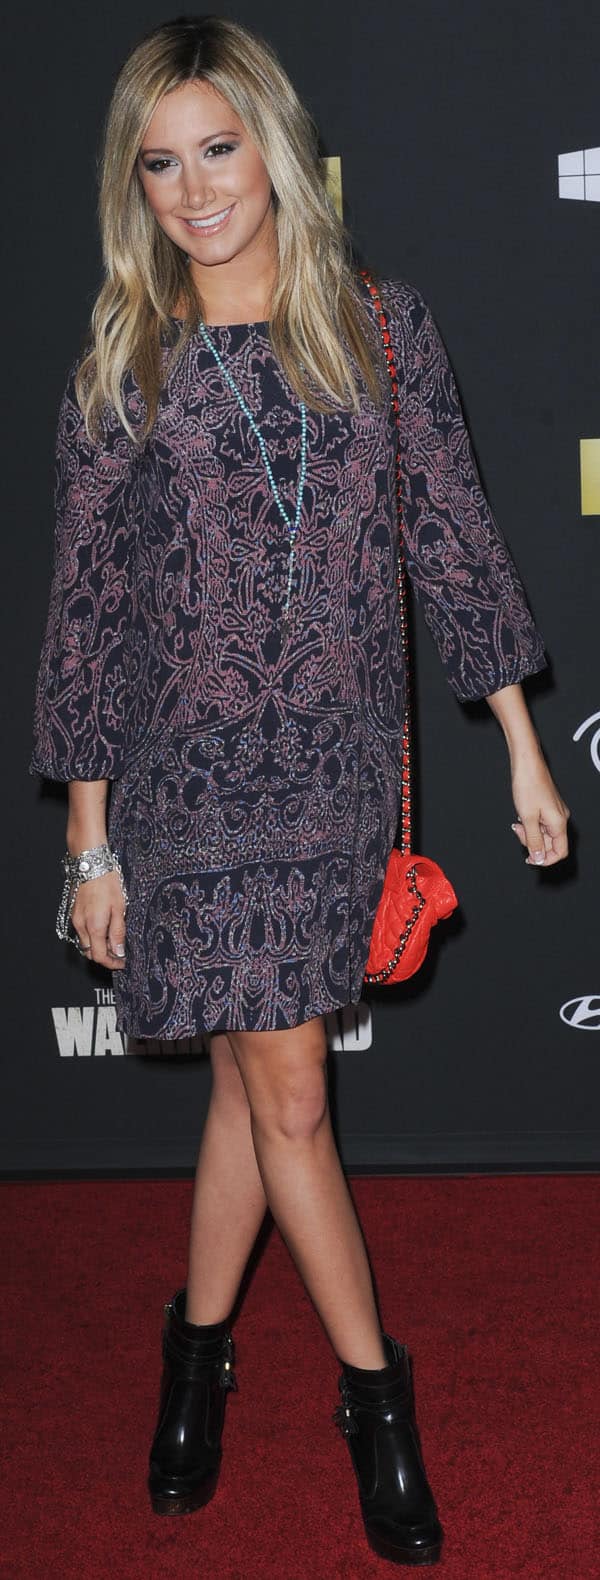 Ashley Tisdale at the fourth season premiere of 'The Walking Dead' in Los Angeles on October 4, 2013